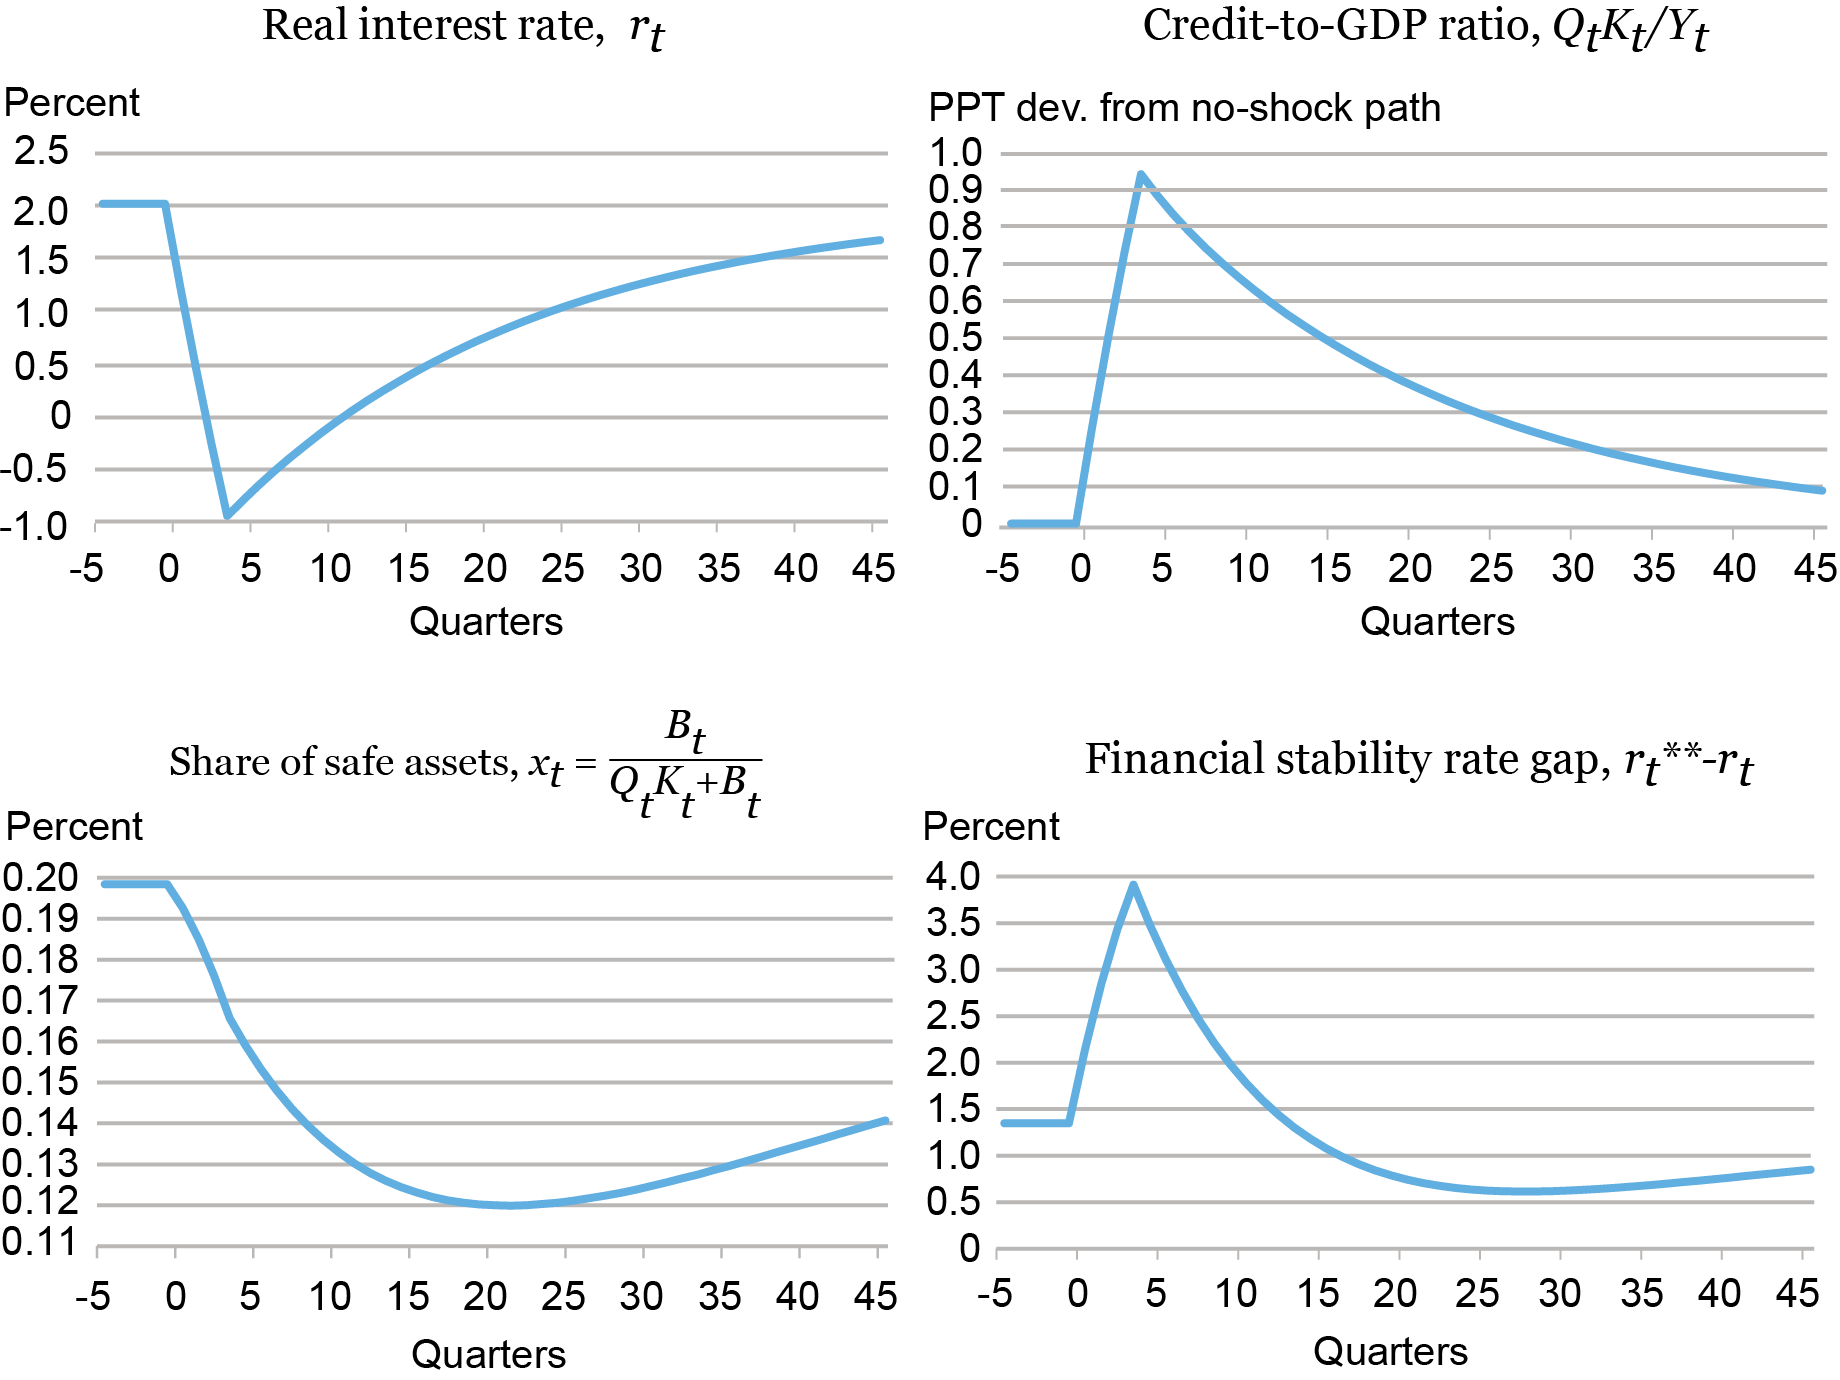 A four-panel Liberty Street Economics chart showing the response of intermediaries to persistent interest rate shock. The upper-left panel shows the trajectory of interest rates, while the upper-right panel shows the credit to GDP ratio. The shift in the intermediaries’ portfolios is shown in the bottom left panel, and the financial stability rate gap, which measures the degree of financial vulnerability in the economy, is shown in the bottom right panel. 